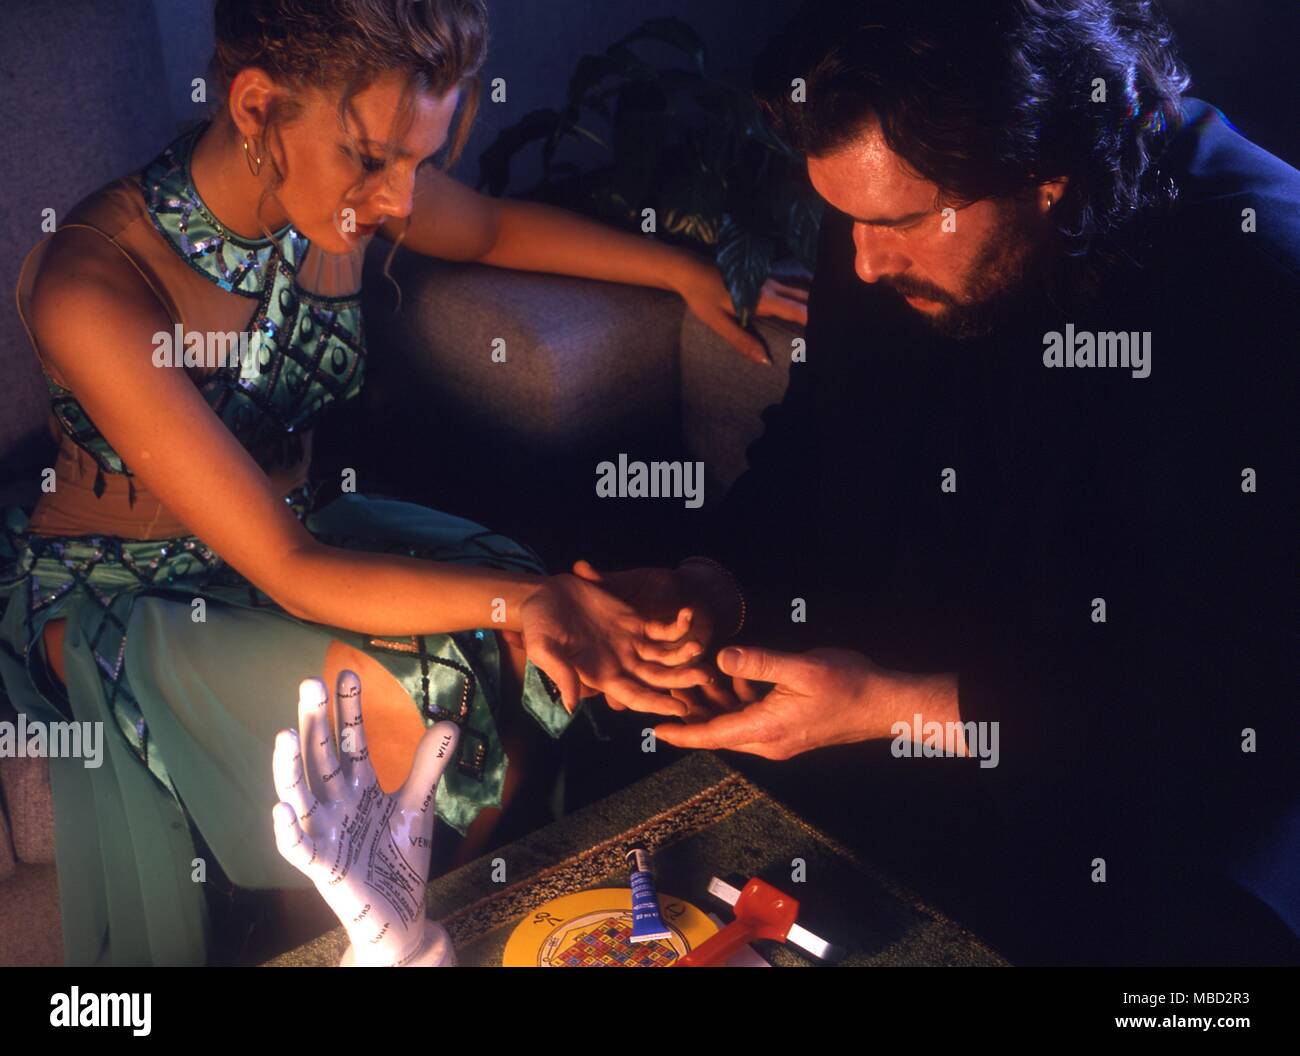 Palmistry - Man reading the hand of a young girl. In front of them is the apparatus for making palm-prints, which are such an important part of the palmistic approach to divination and character-reading.- © / CW Stock Photo